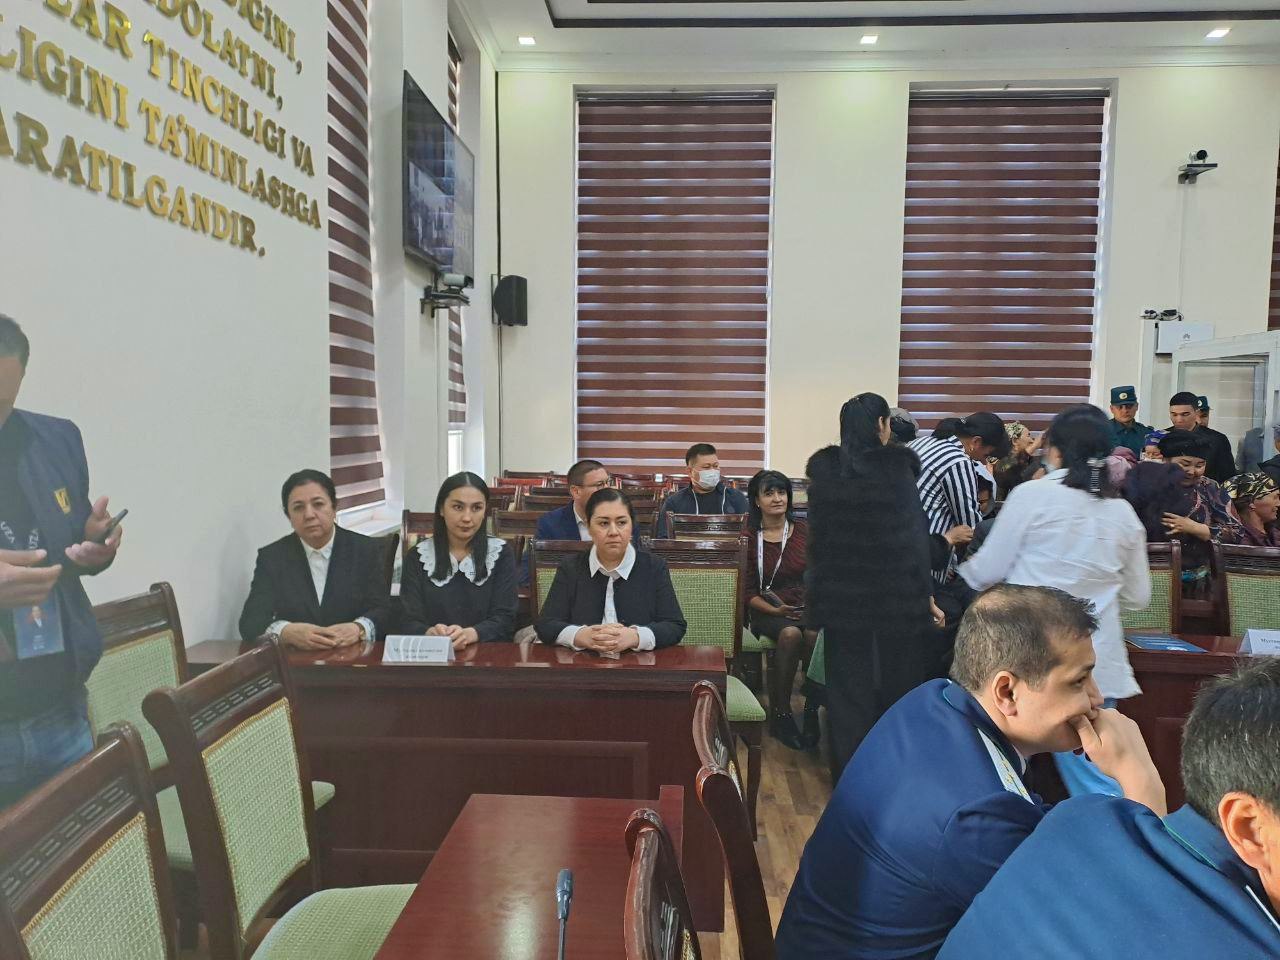 The Independent Commission appealed to the Chairman of the court with a request to sentence 39 defendants on the basis of the principles of humanity